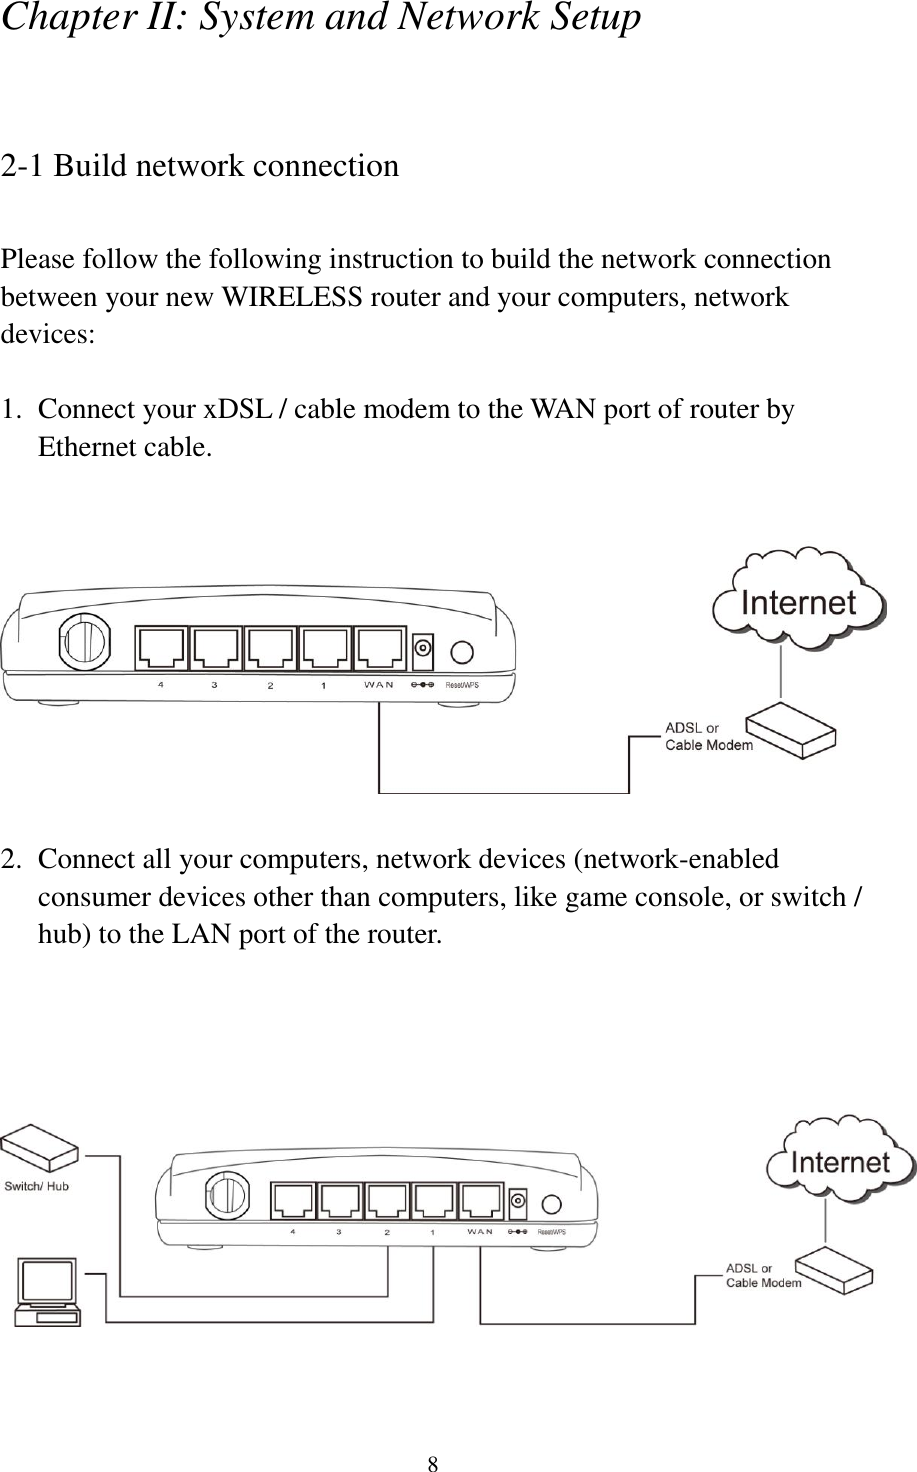 8 Chapter II: System and Network Setup  2-1 Build network connection  Please follow the following instruction to build the network connection between your new WIRELESS router and your computers, network devices:  1. Connect your xDSL / cable modem to the WAN port of router by Ethernet cable.      2. Connect all your computers, network devices (network-enabled consumer devices other than computers, like game console, or switch / hub) to the LAN port of the router.     